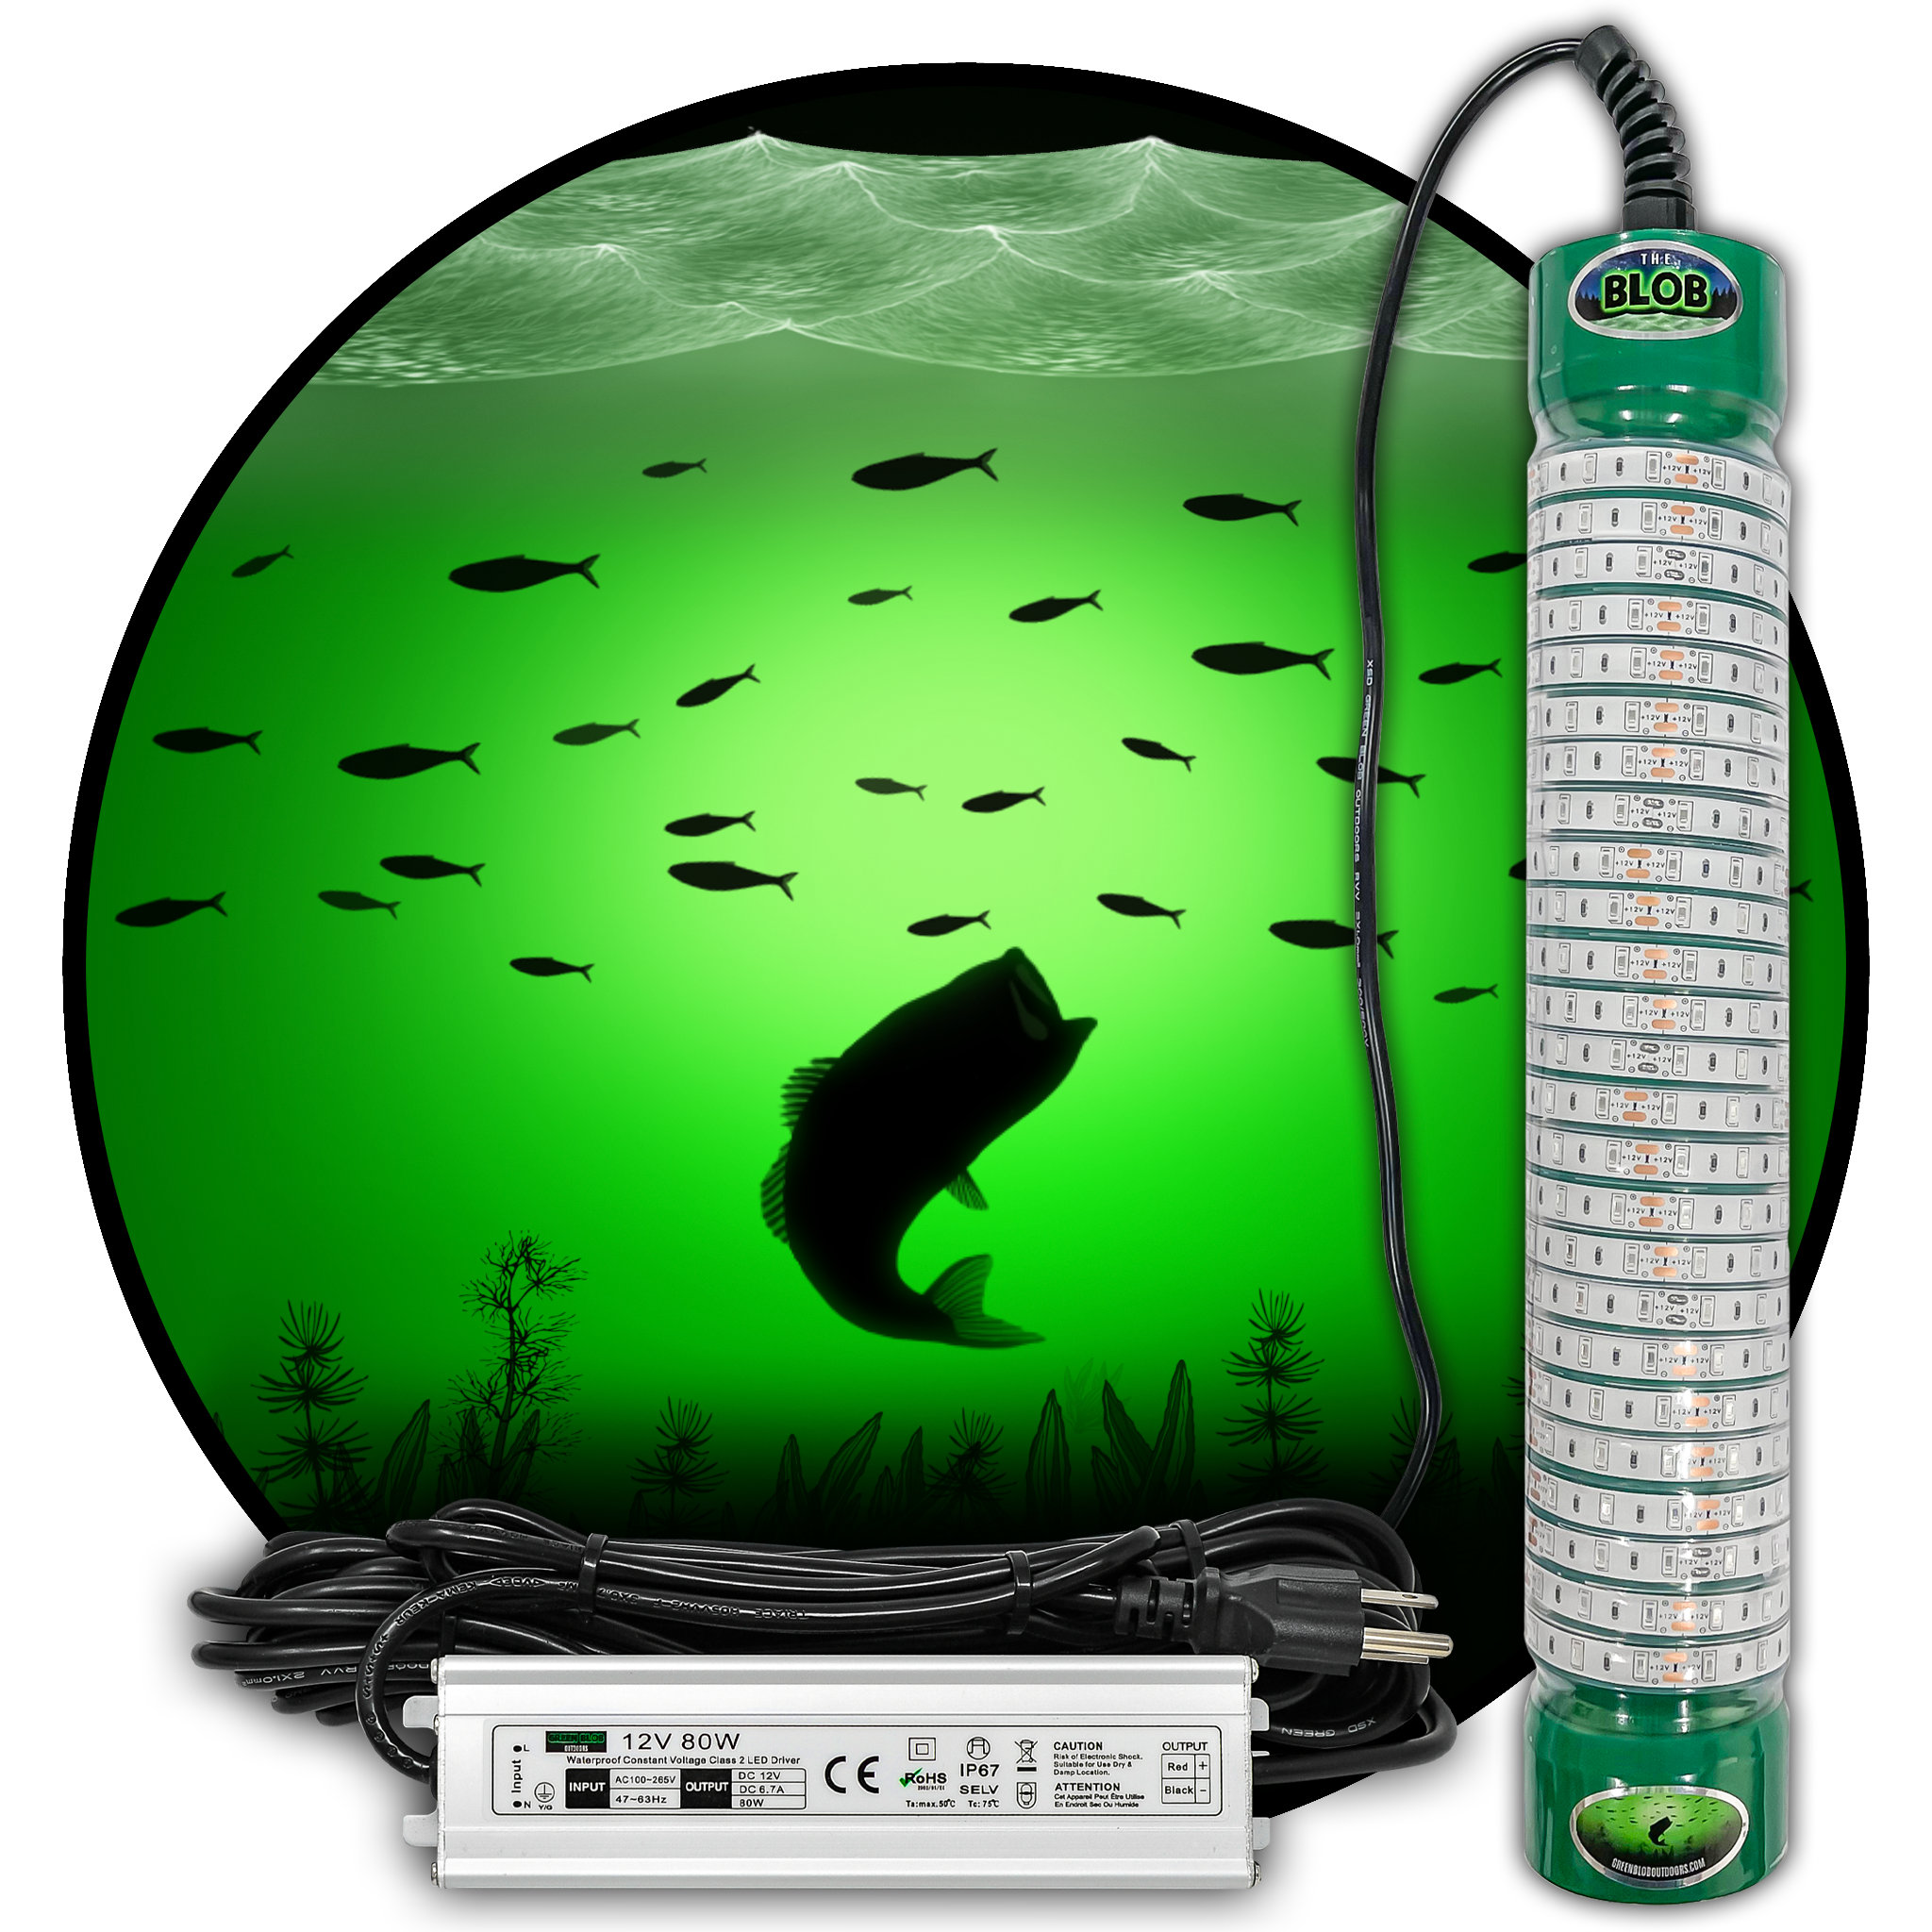 Submersible Fishing Lights for sale, Shop with Afterpay